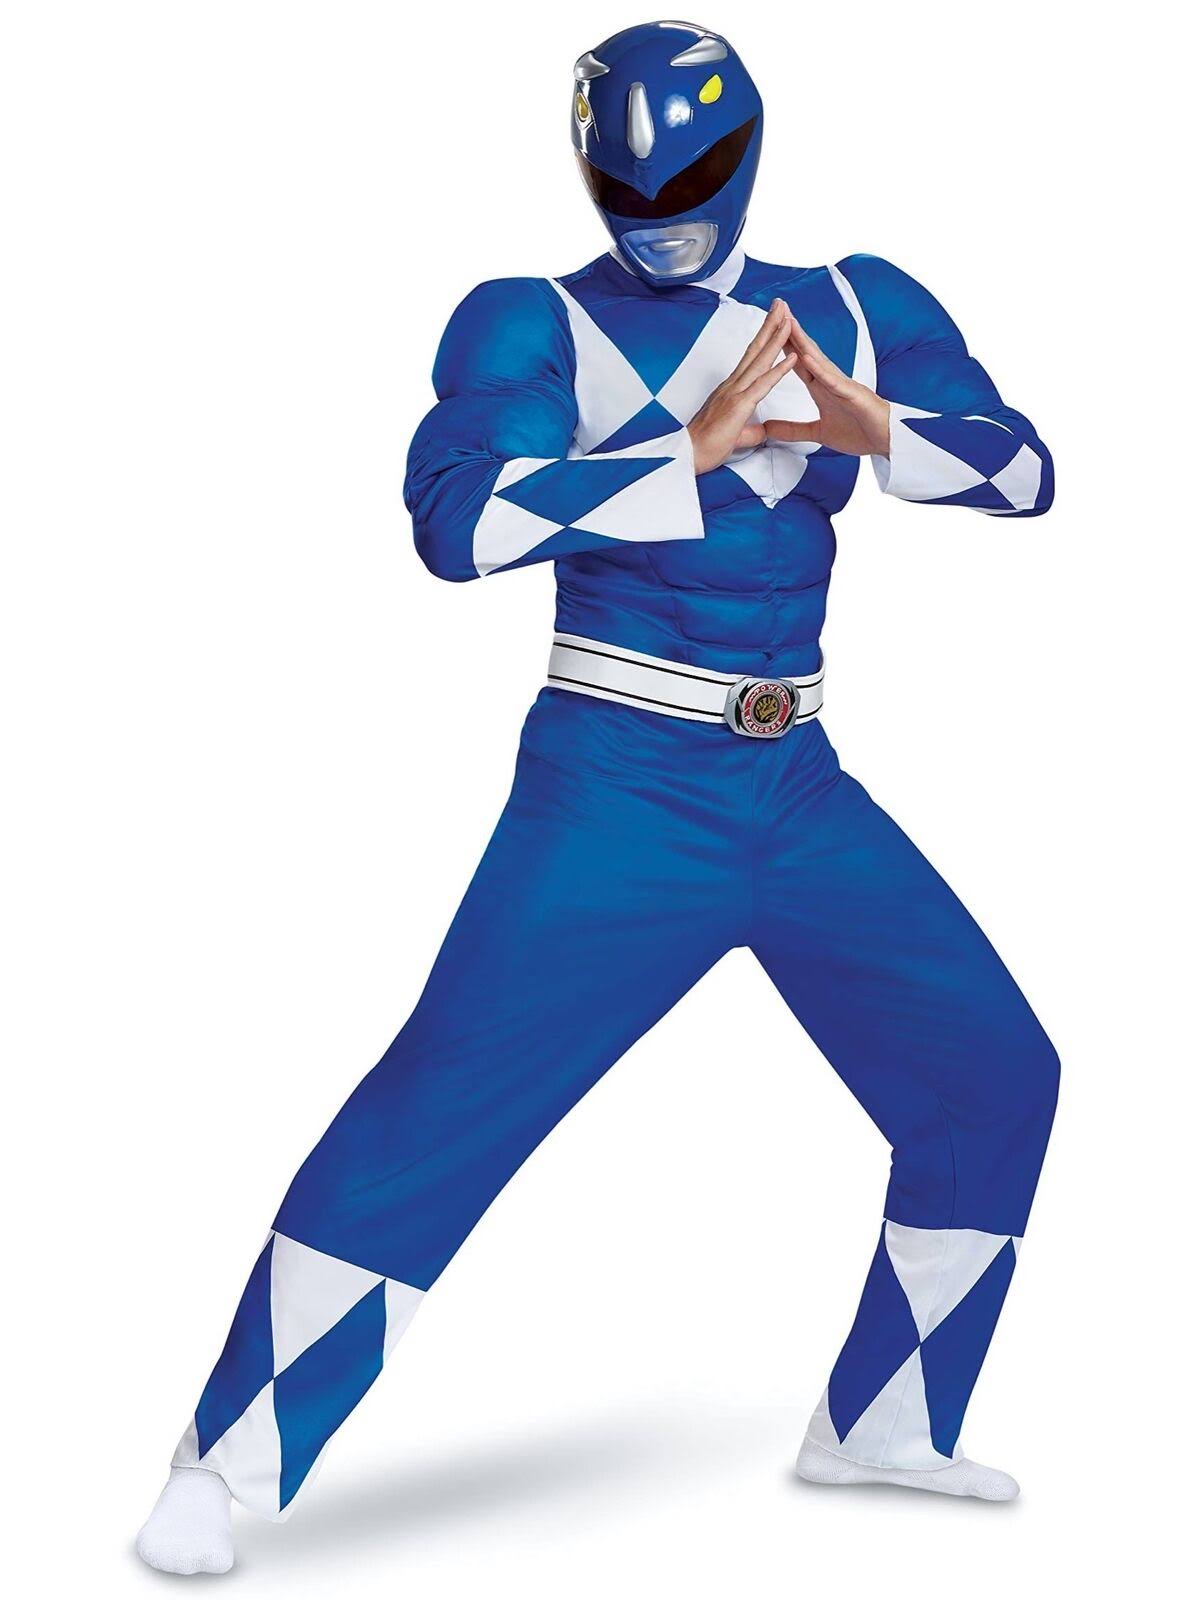 Disguise Power Rangers Blue Classic Muscle Adult Mens Halloween Costume 79731 - XL (42-46)